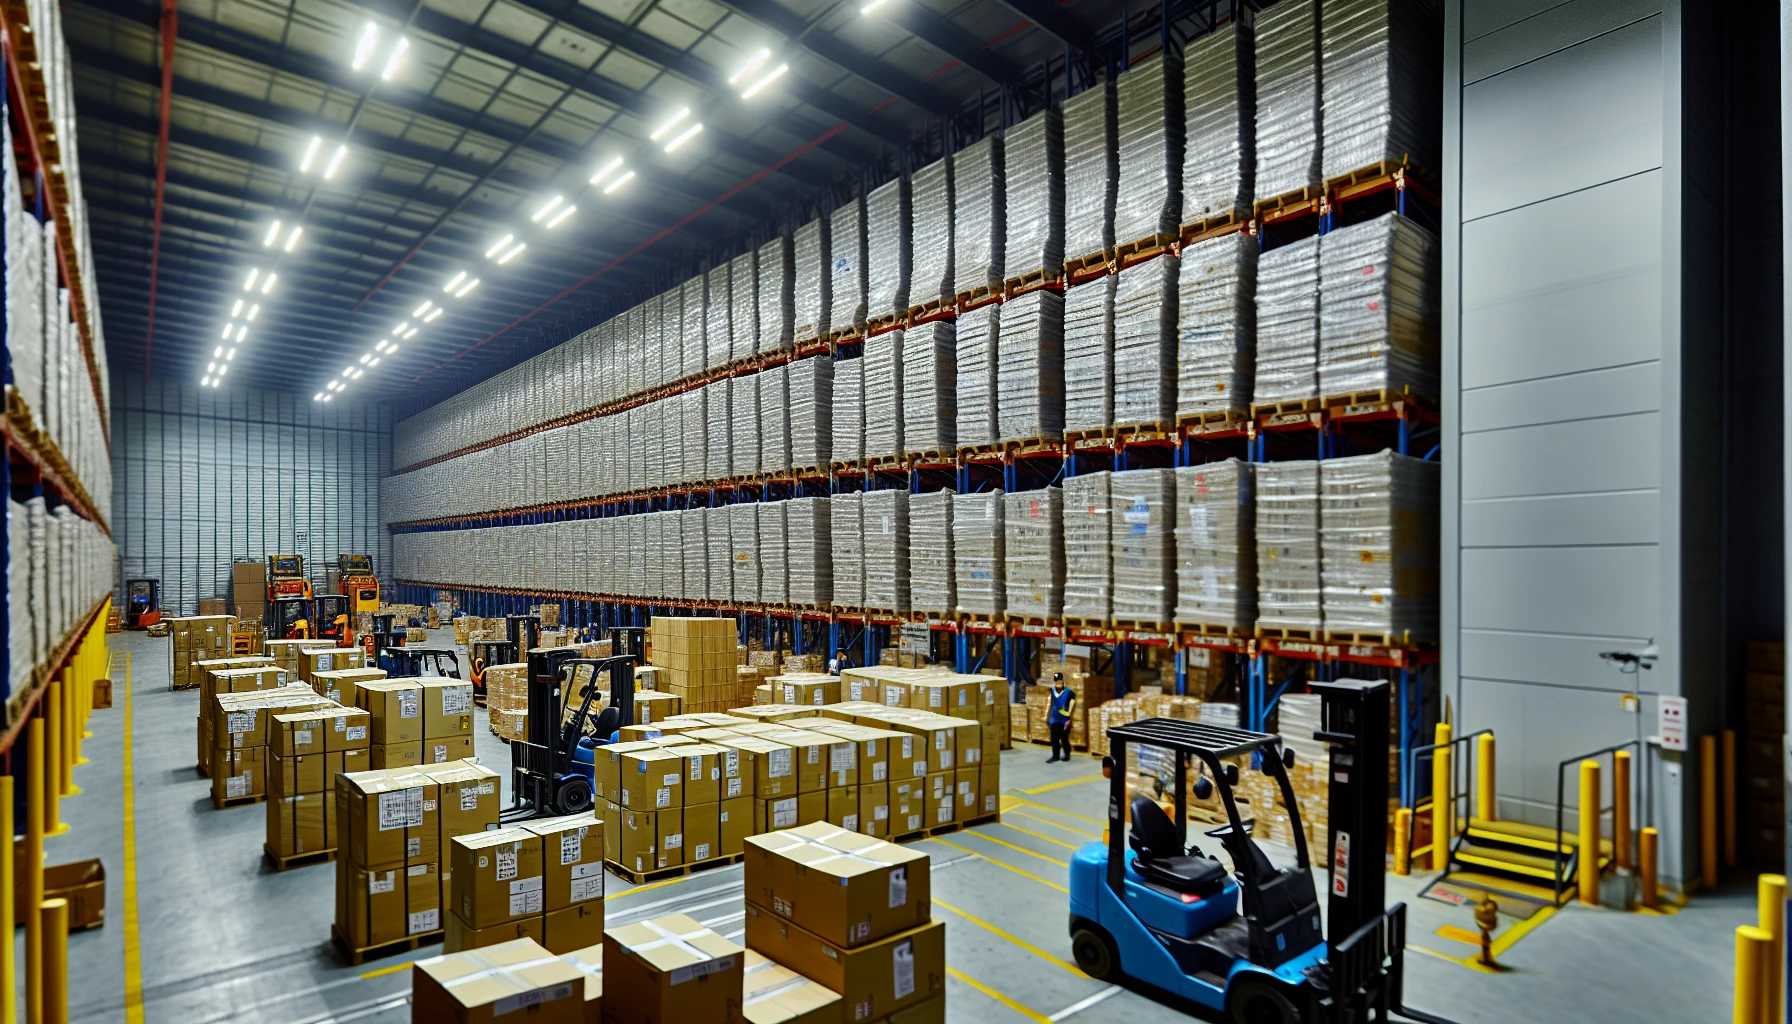 Consolidating shipments to save on freight costs